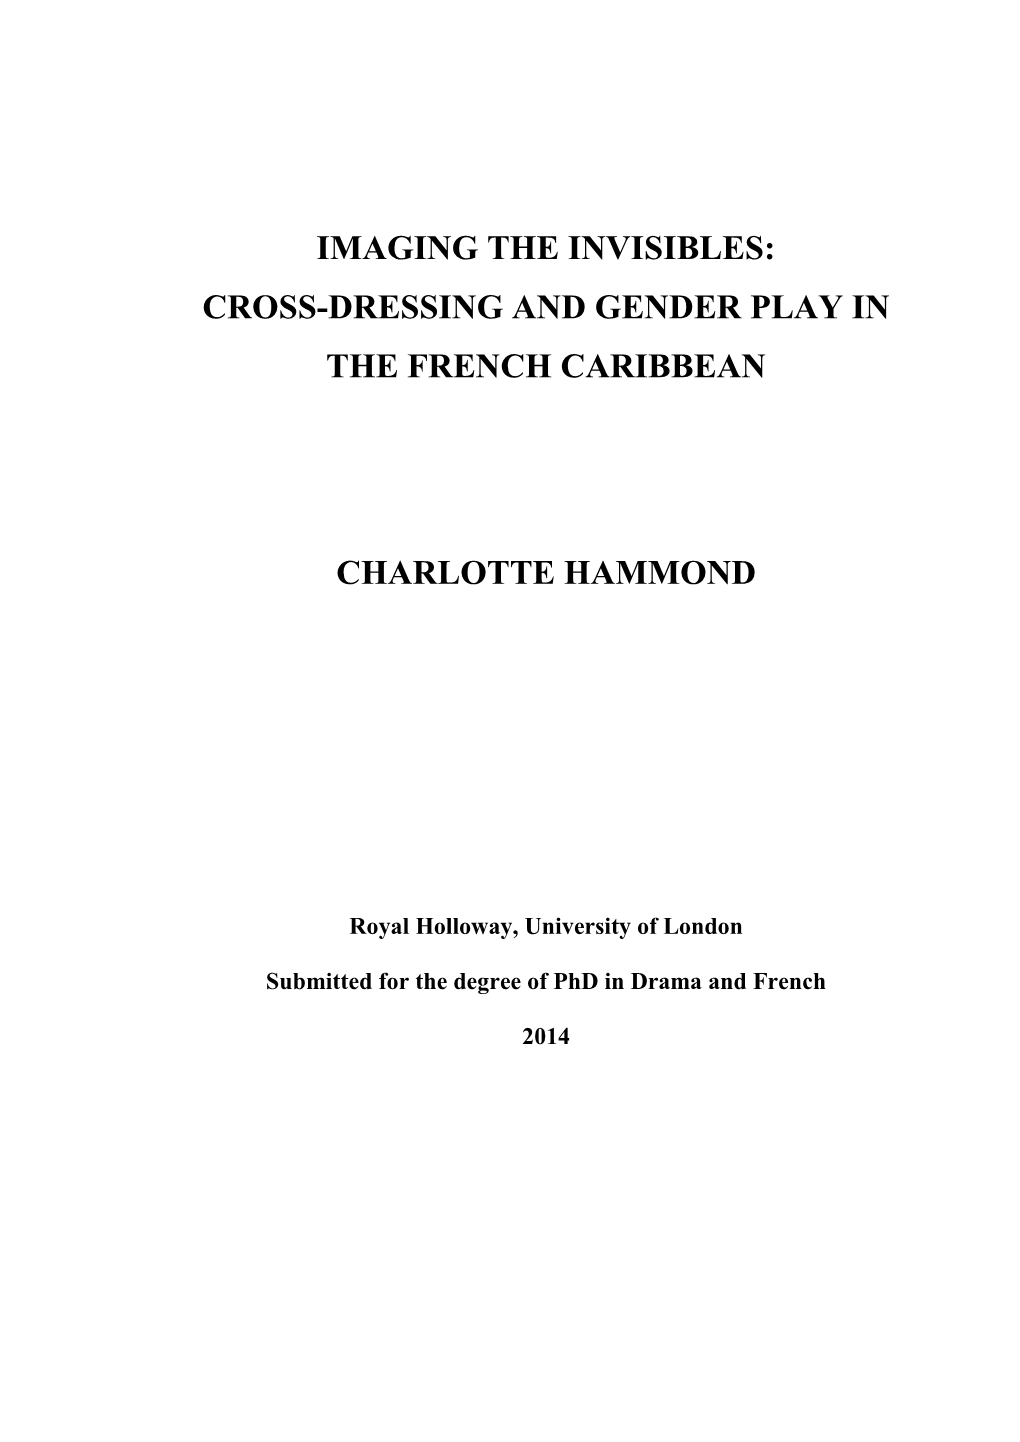 Imaging the Invisibles: Cross-Dressing and Gender Play in the French Caribbean